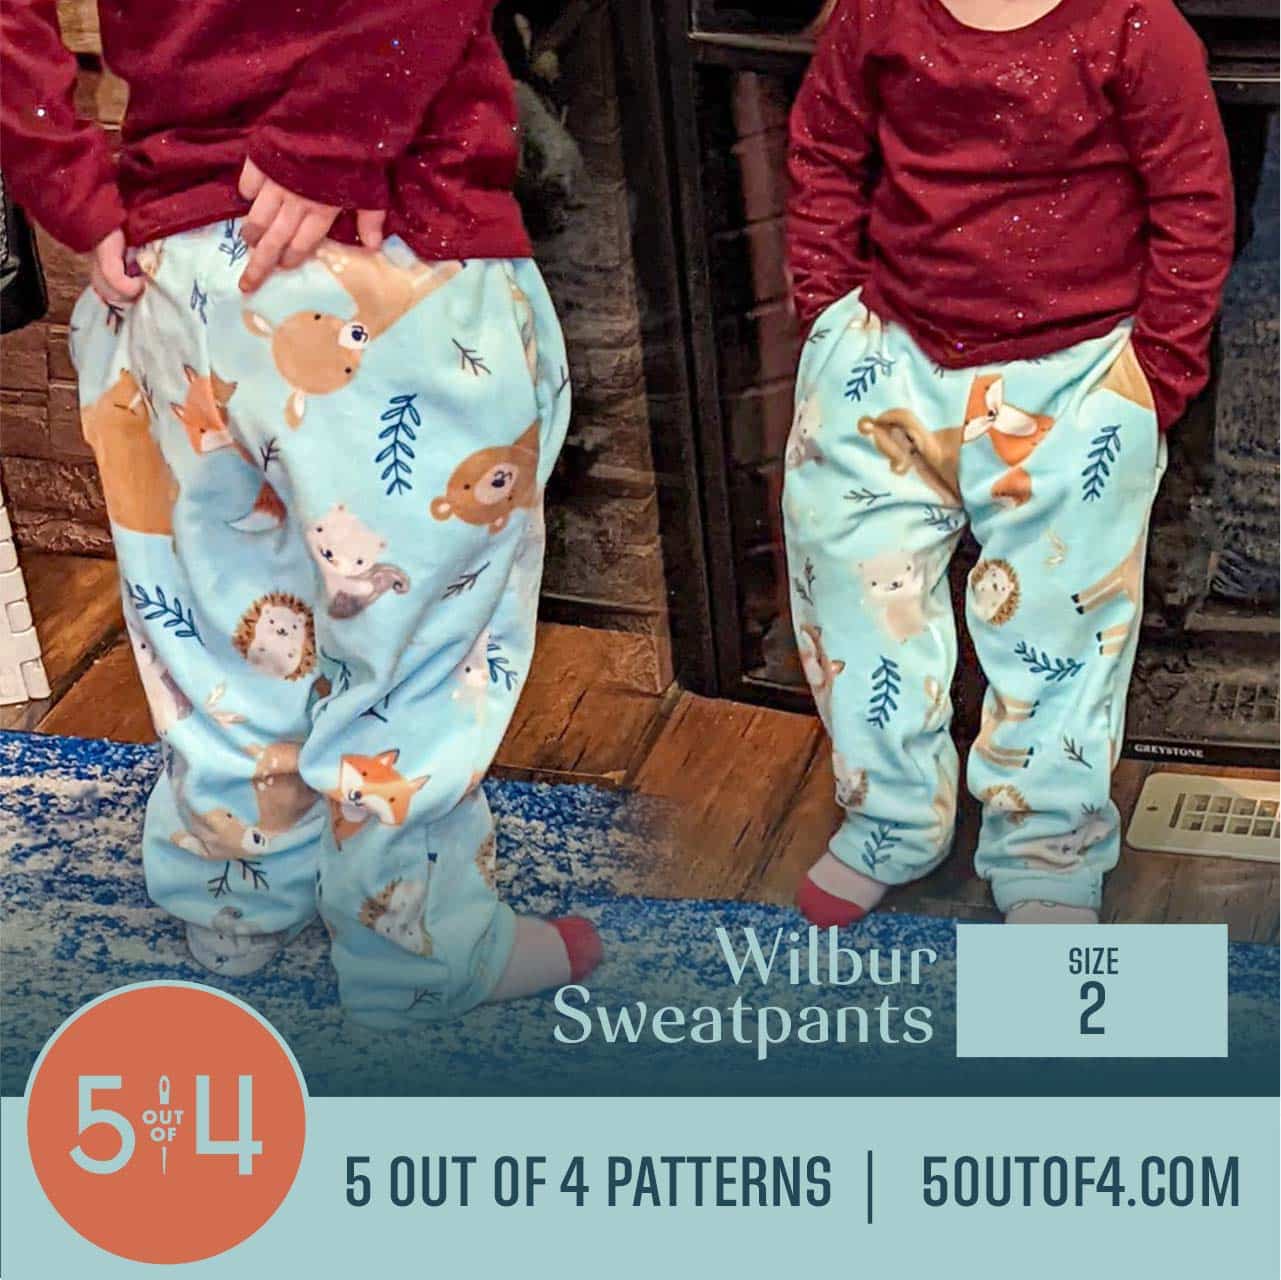 Wilbur Sweatpants - 5 out of 4 Patterns